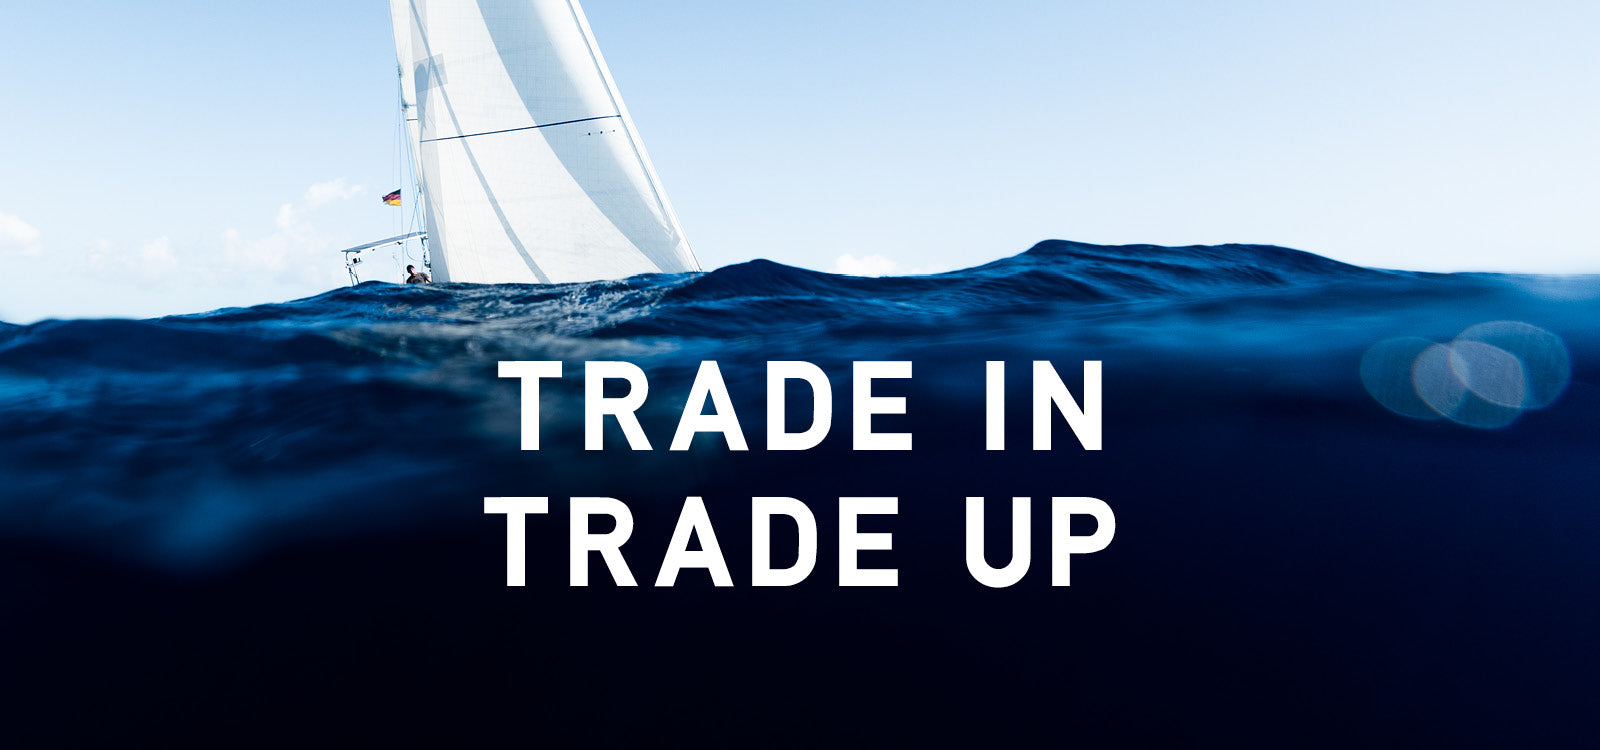 sail trade in